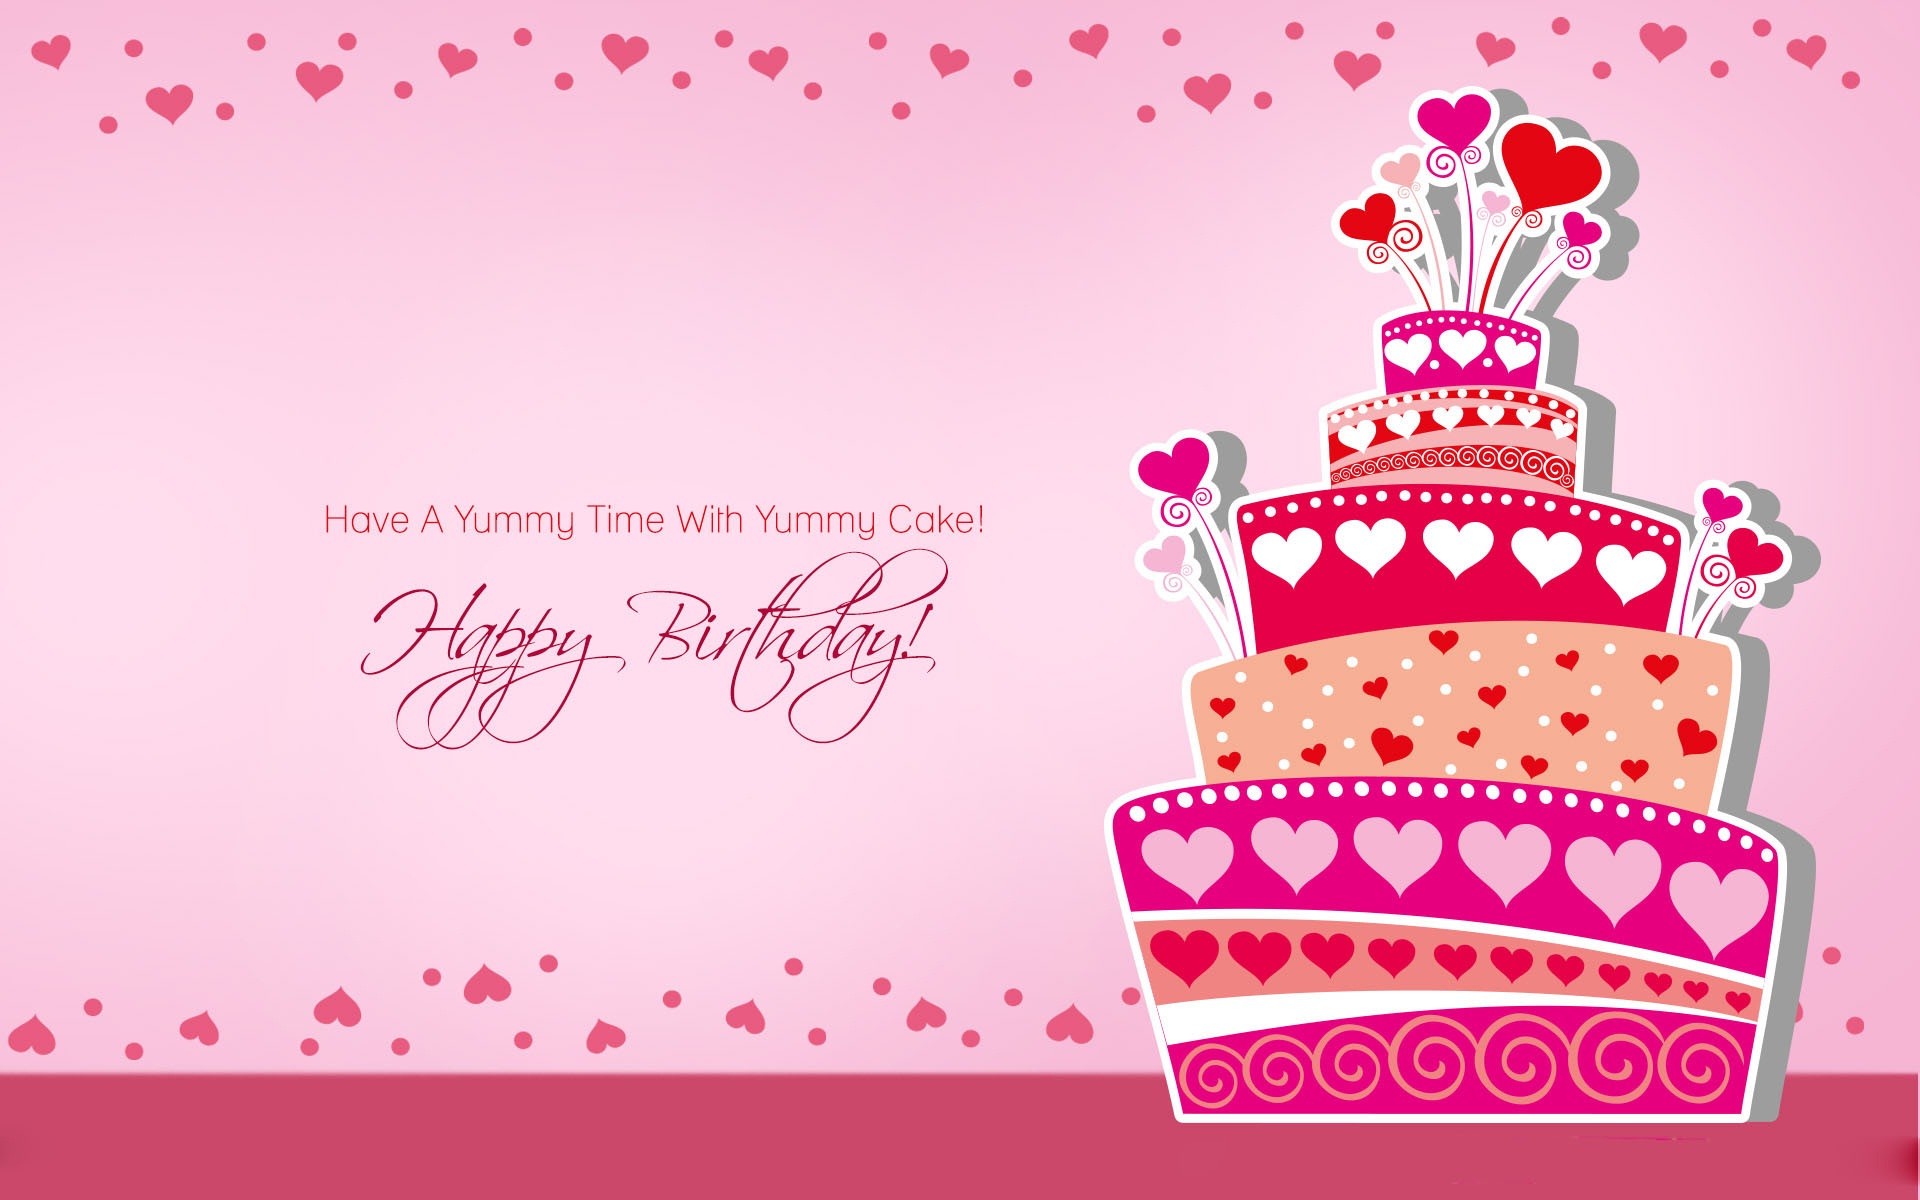 1920x1200 Happy birthday best wishes cake and quotes HD Wallpapers Rocks